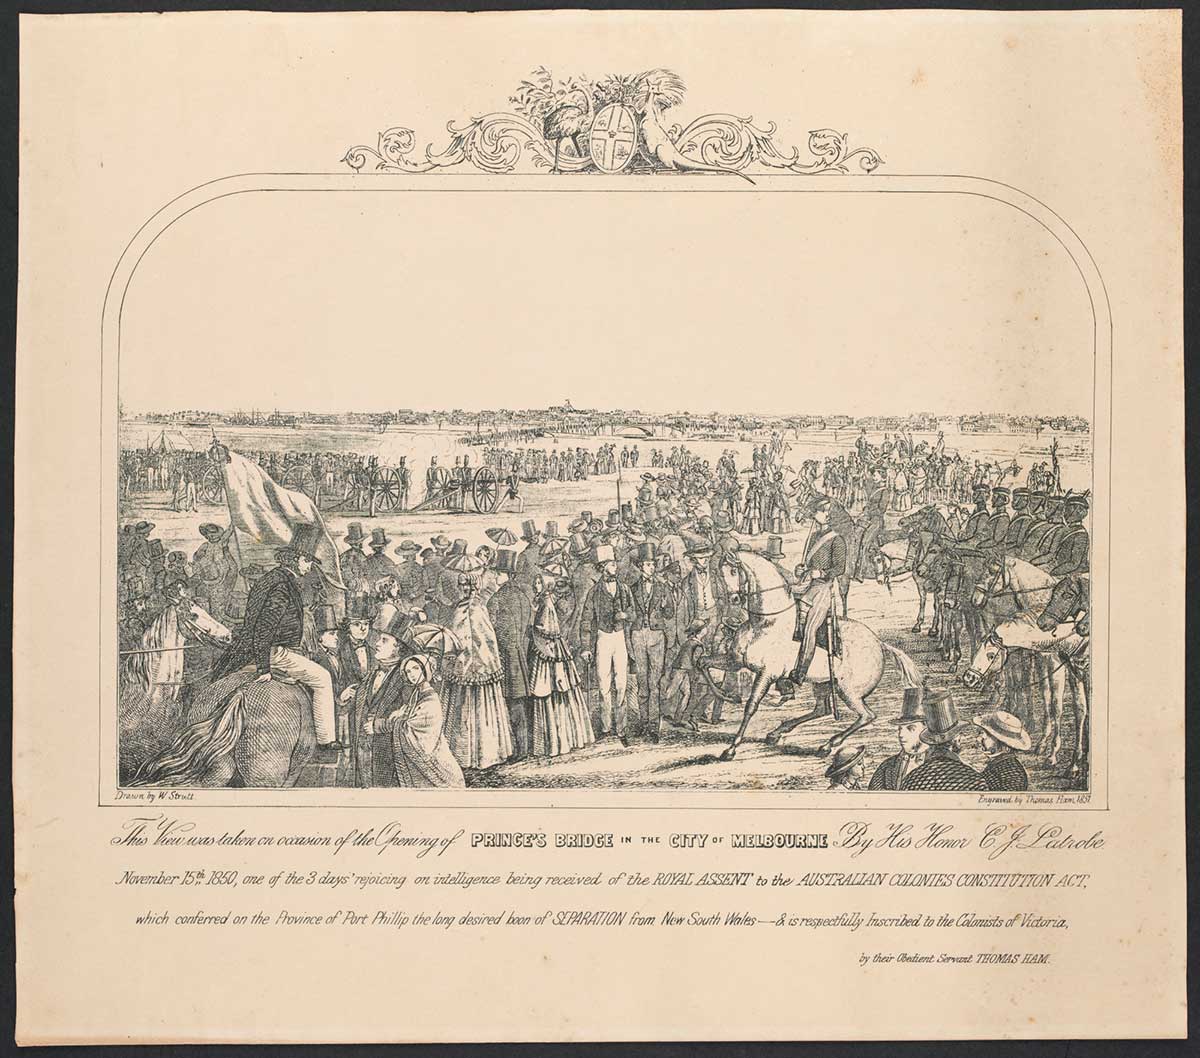 Back and white illustration depicting crowds of civilians and officers on horseback gathered for an official ceremony. In the distance is a bridge and town further beyond.